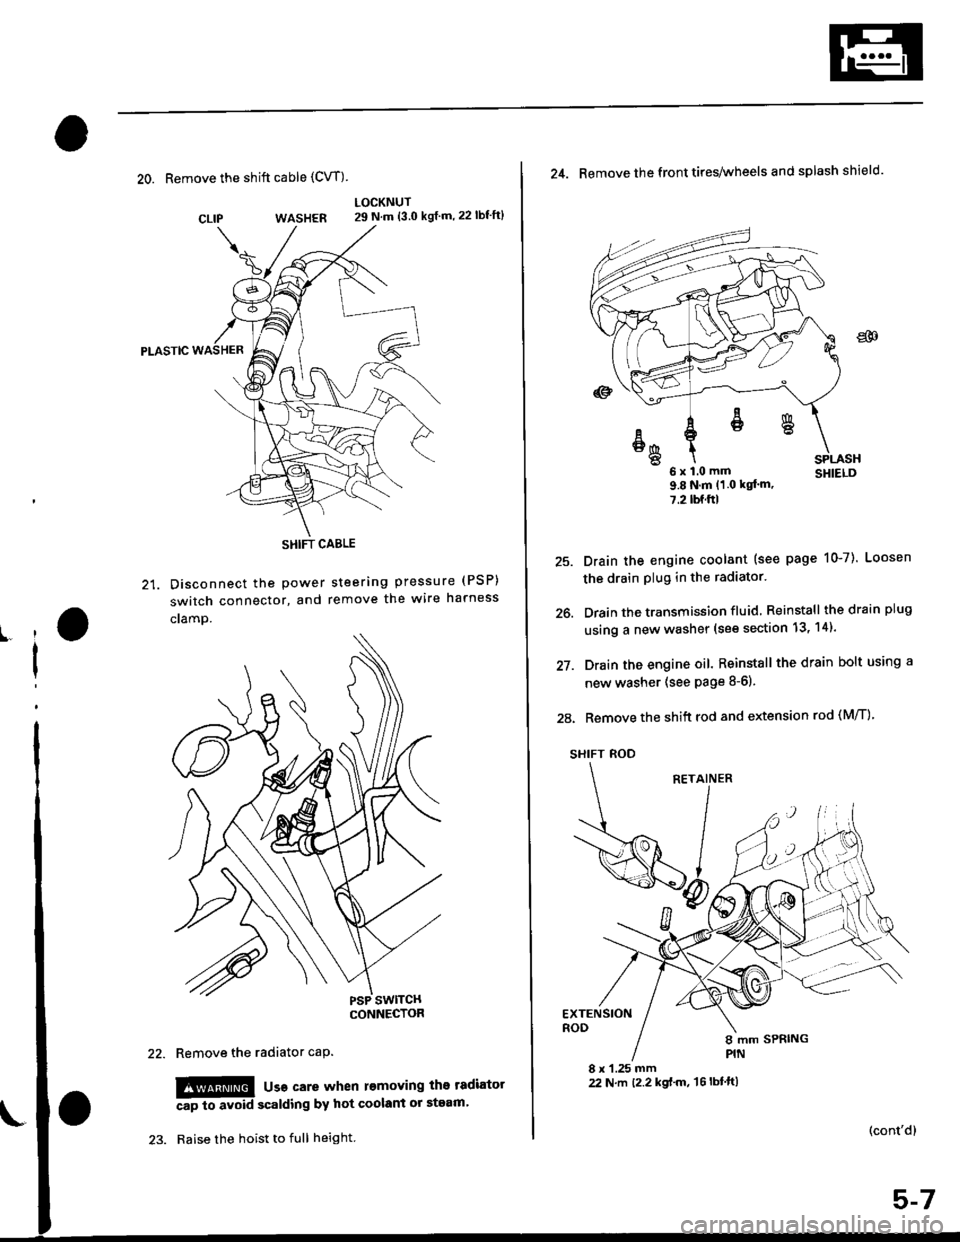 HONDA CIVIC 2000 6.G Workshop Manual 20. Remove the shift cable (CVT)
WASHER
Pt-Aslc
21. Disconnect the Power
switch connector, and
cramp.
LOCKNUT29 N.m {3.0 kgf m,22lbfft}
steering pressure (PSP)
remove the wire harness
CLIP
ll
I
Remov